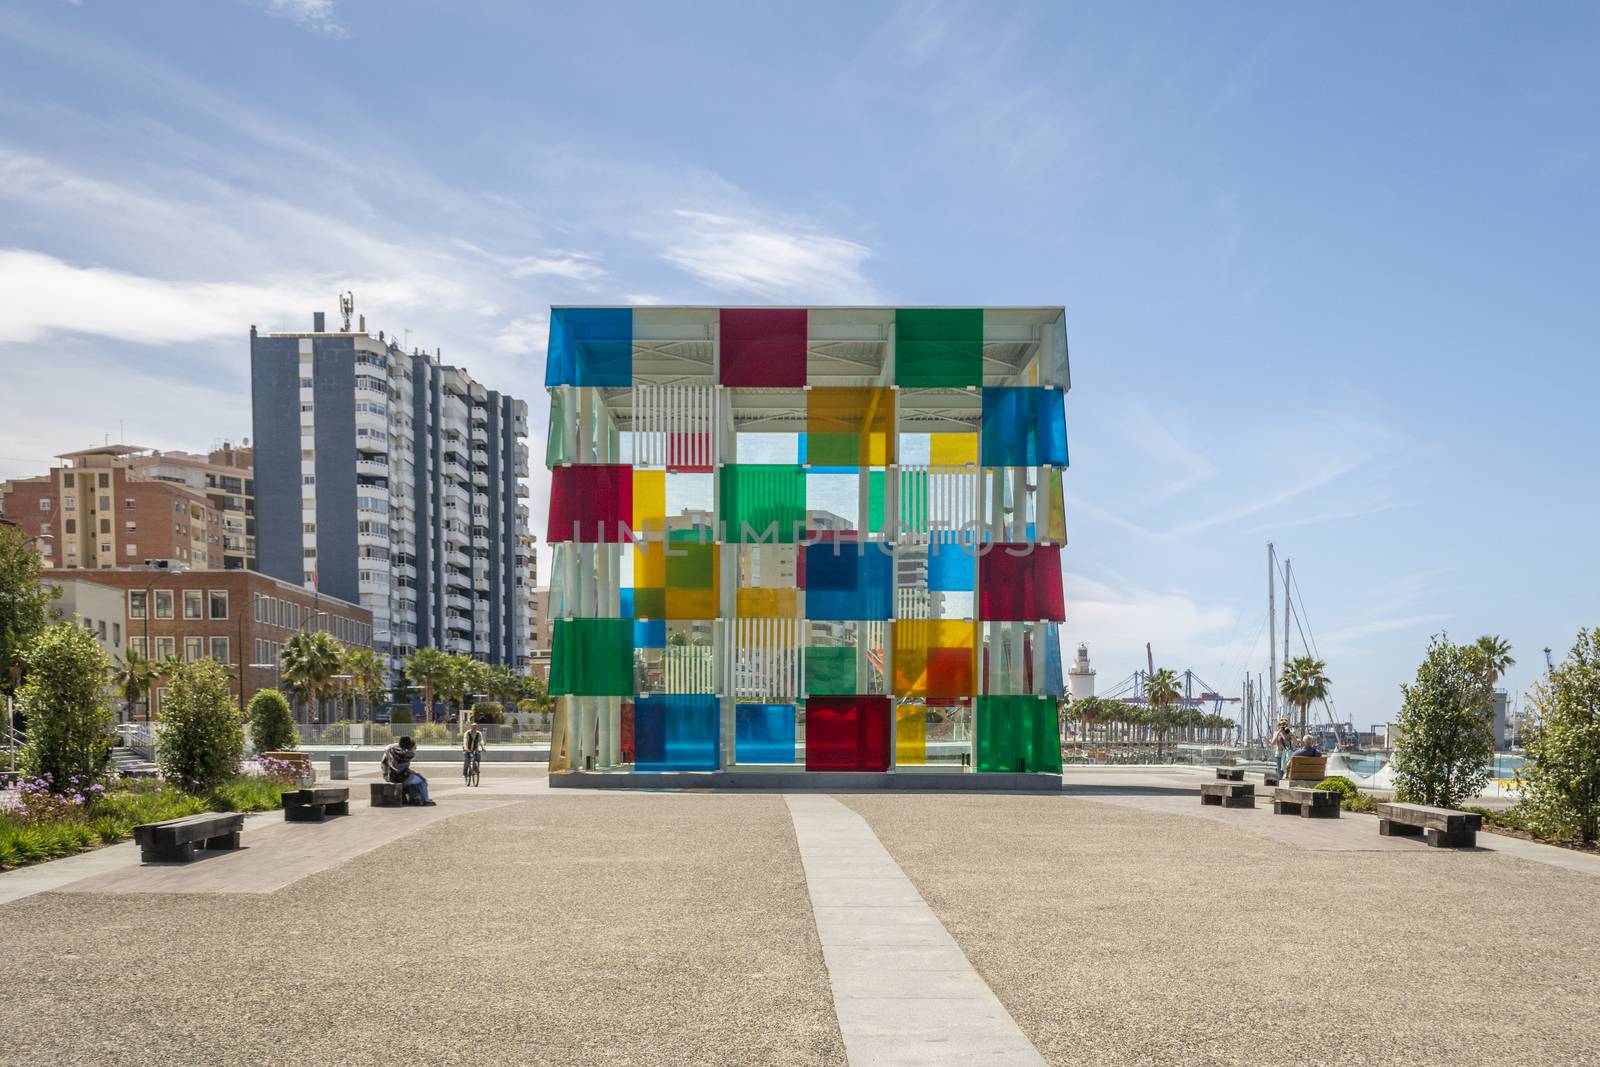 Malaga, Spain, April 2016: Centre pompidou in Malaga a colorful cube from glass and steel, also called el cubo